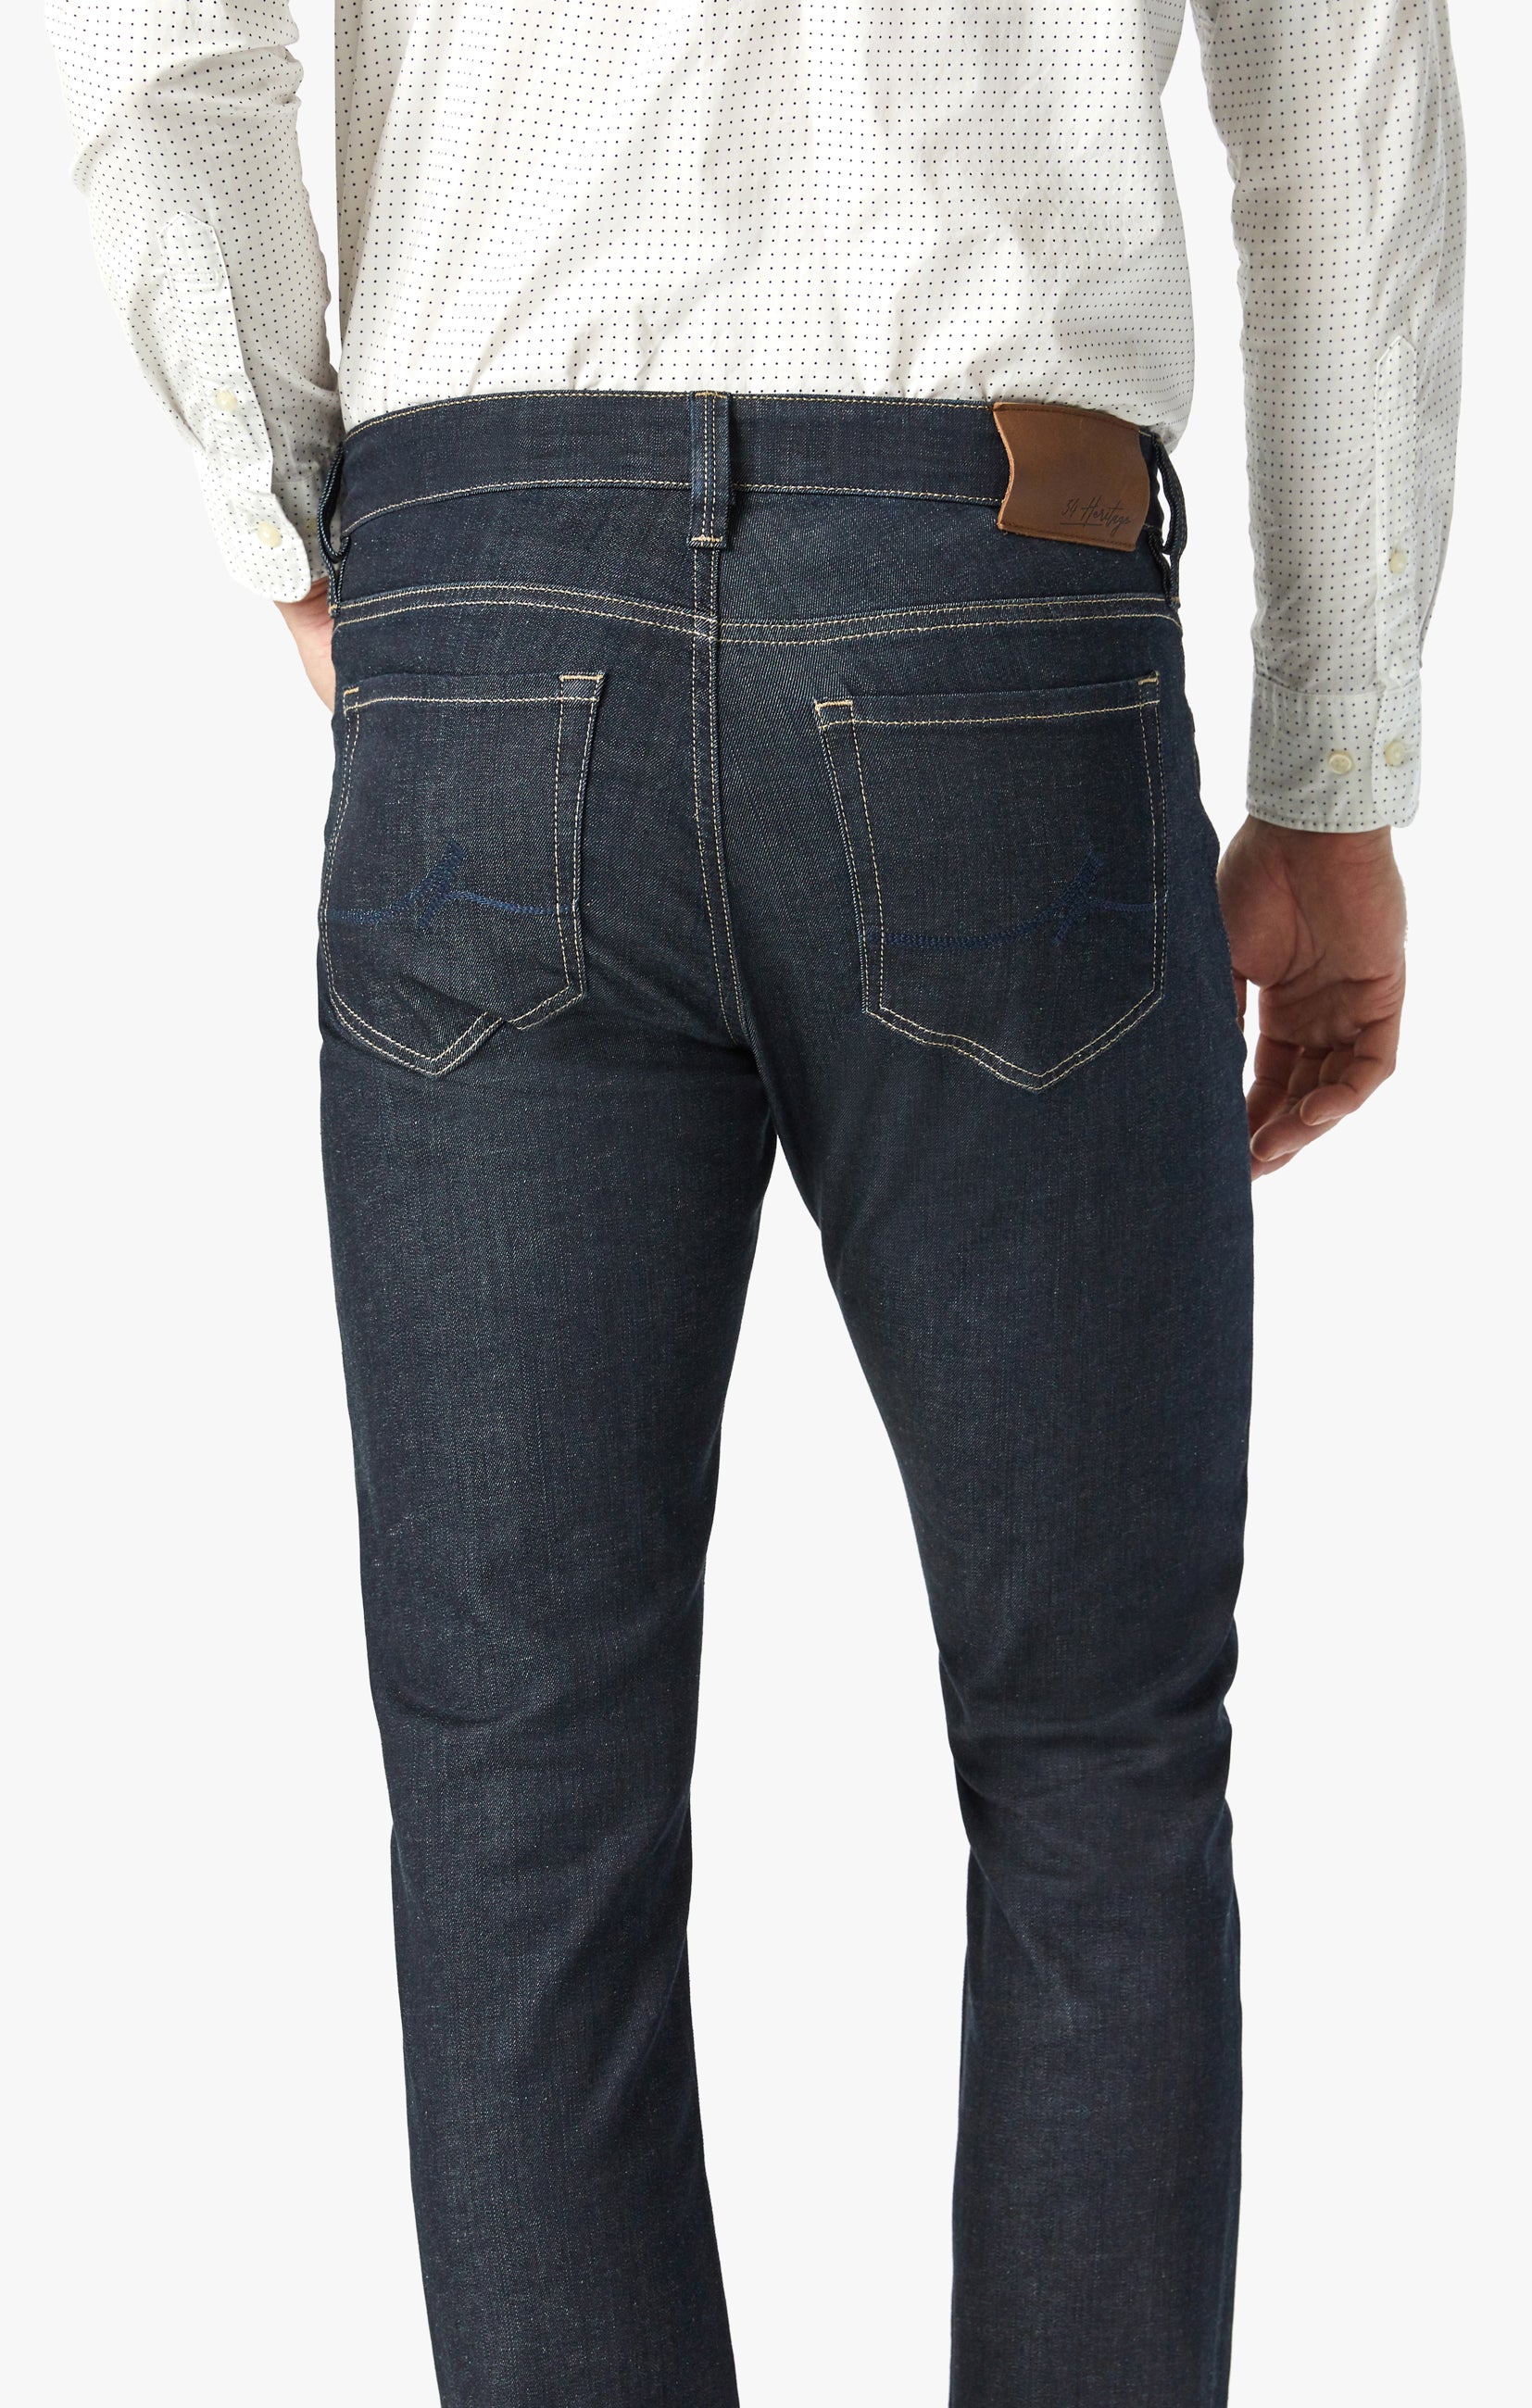 Charisma Classic Fit Jeans In Rinse Soft Image 5